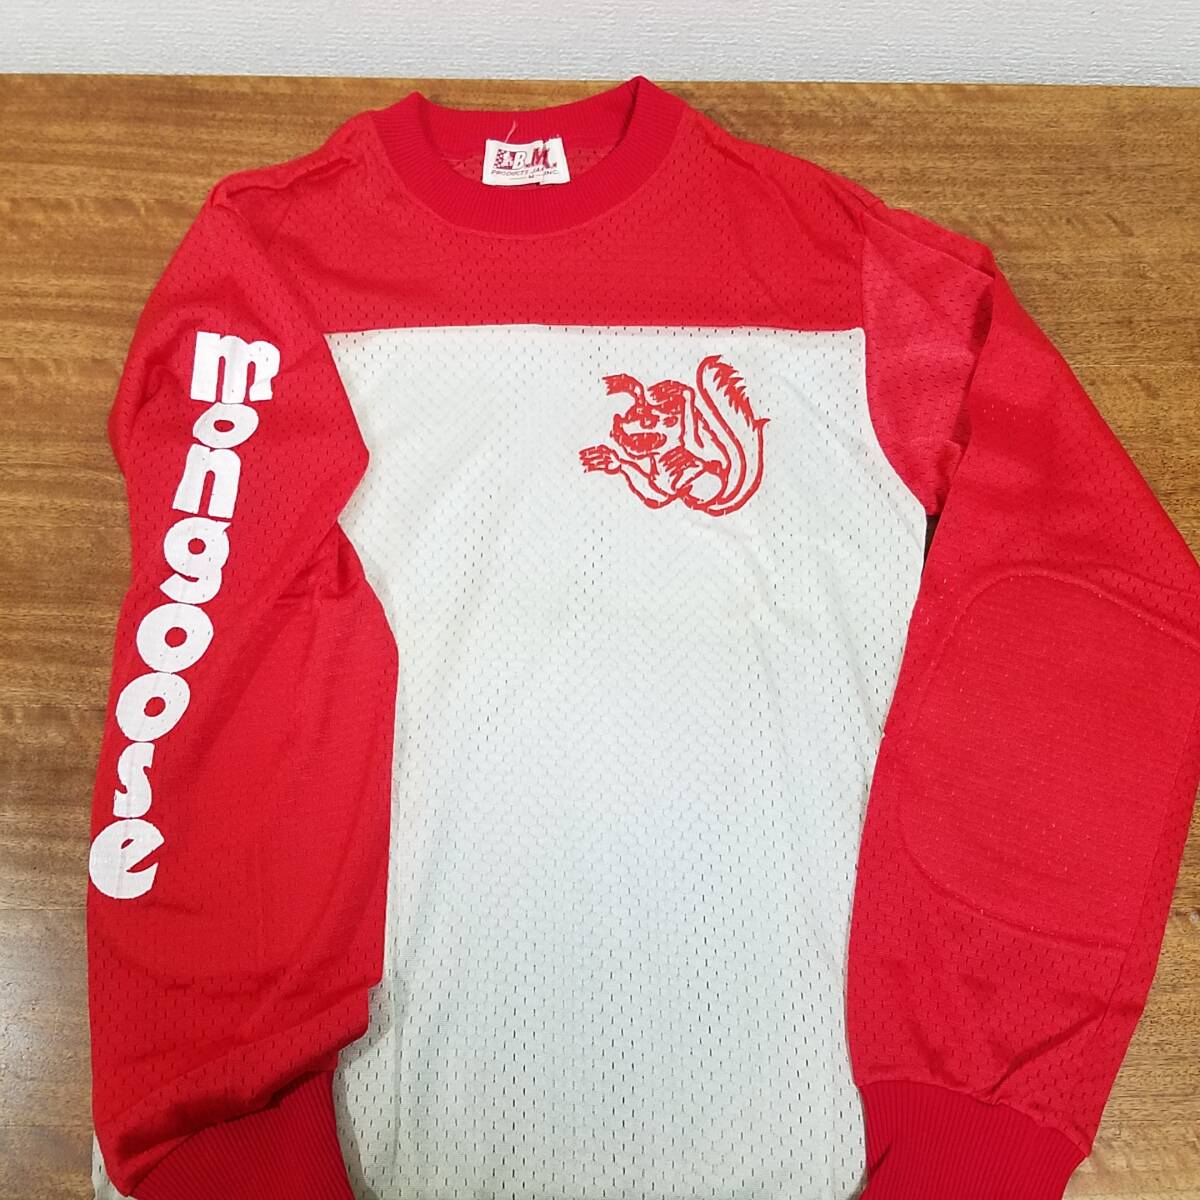 BMX mngoose (Мサイズ)　MADE IN JAPAN CYCLE WEAR 　New Old Stock (NOS) 未使用品 ビンテージ_画像1